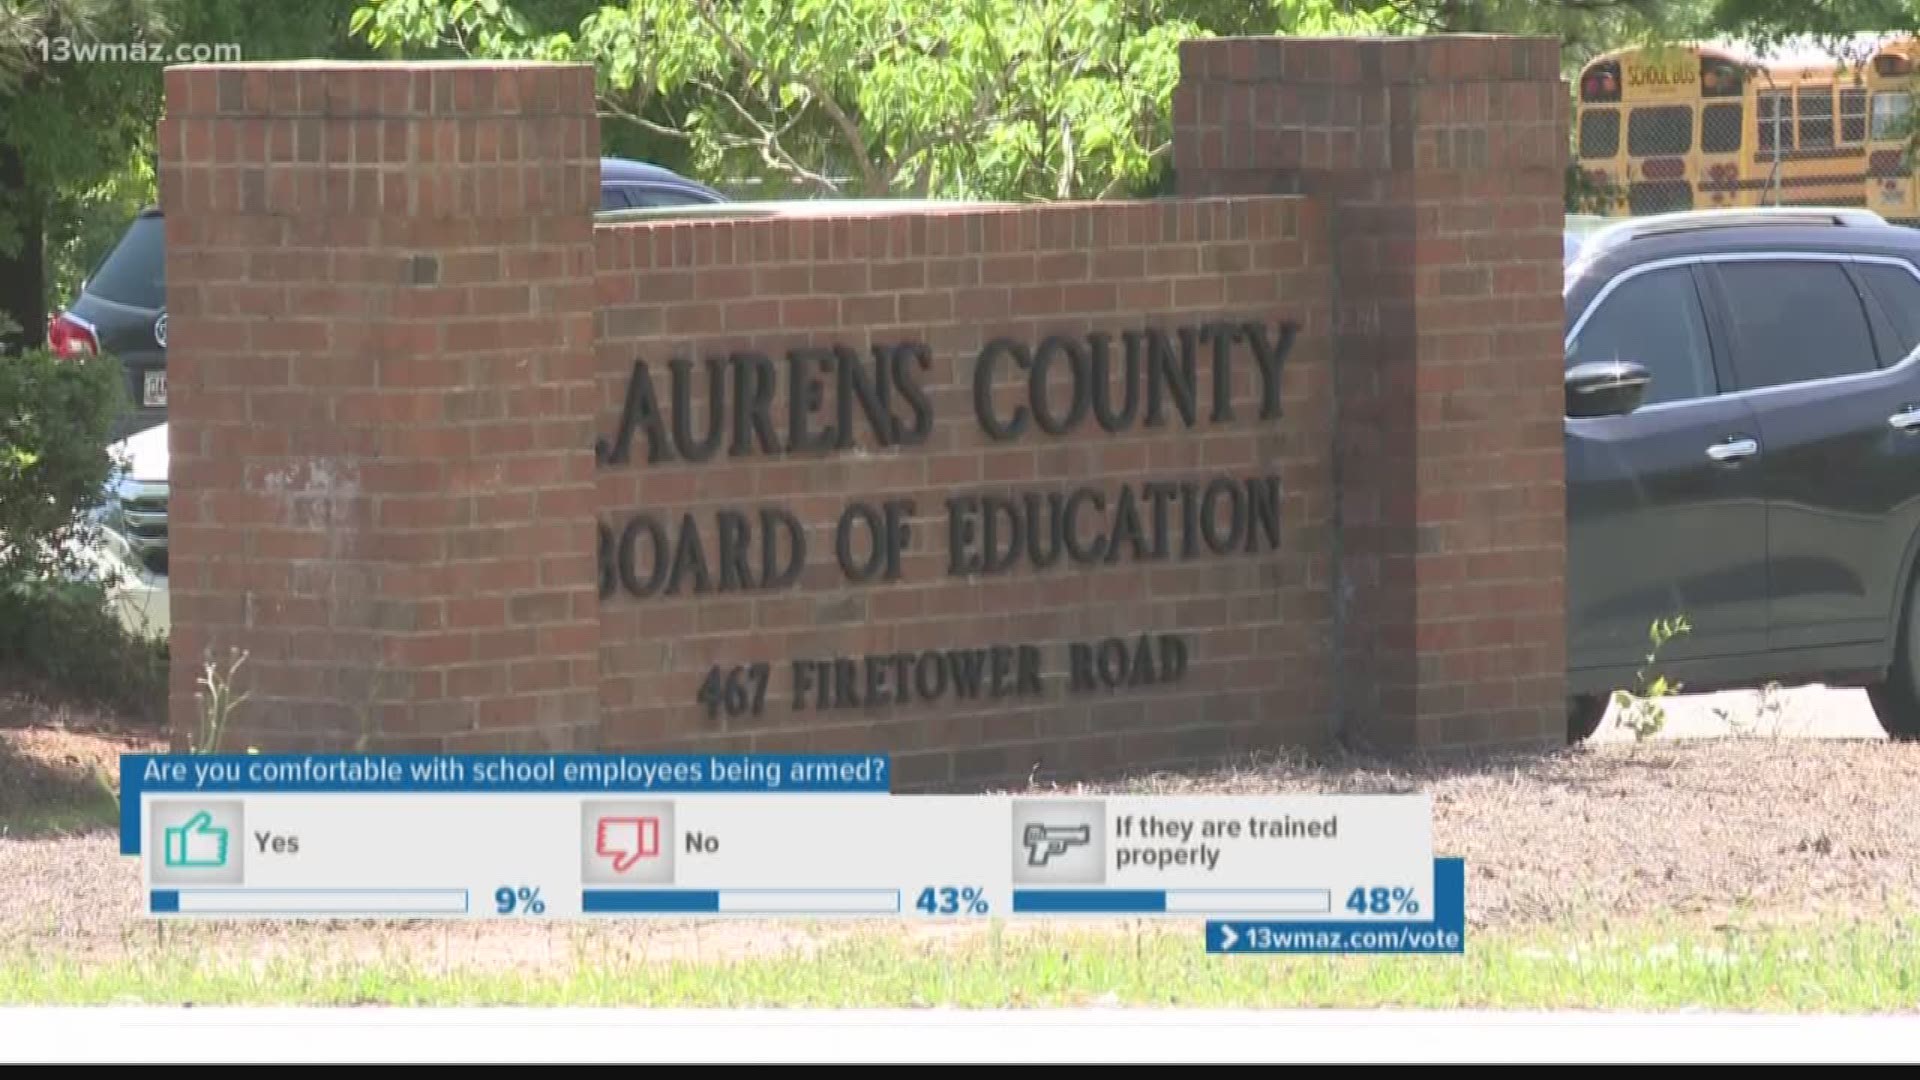 Laurens County Schools to arm employees